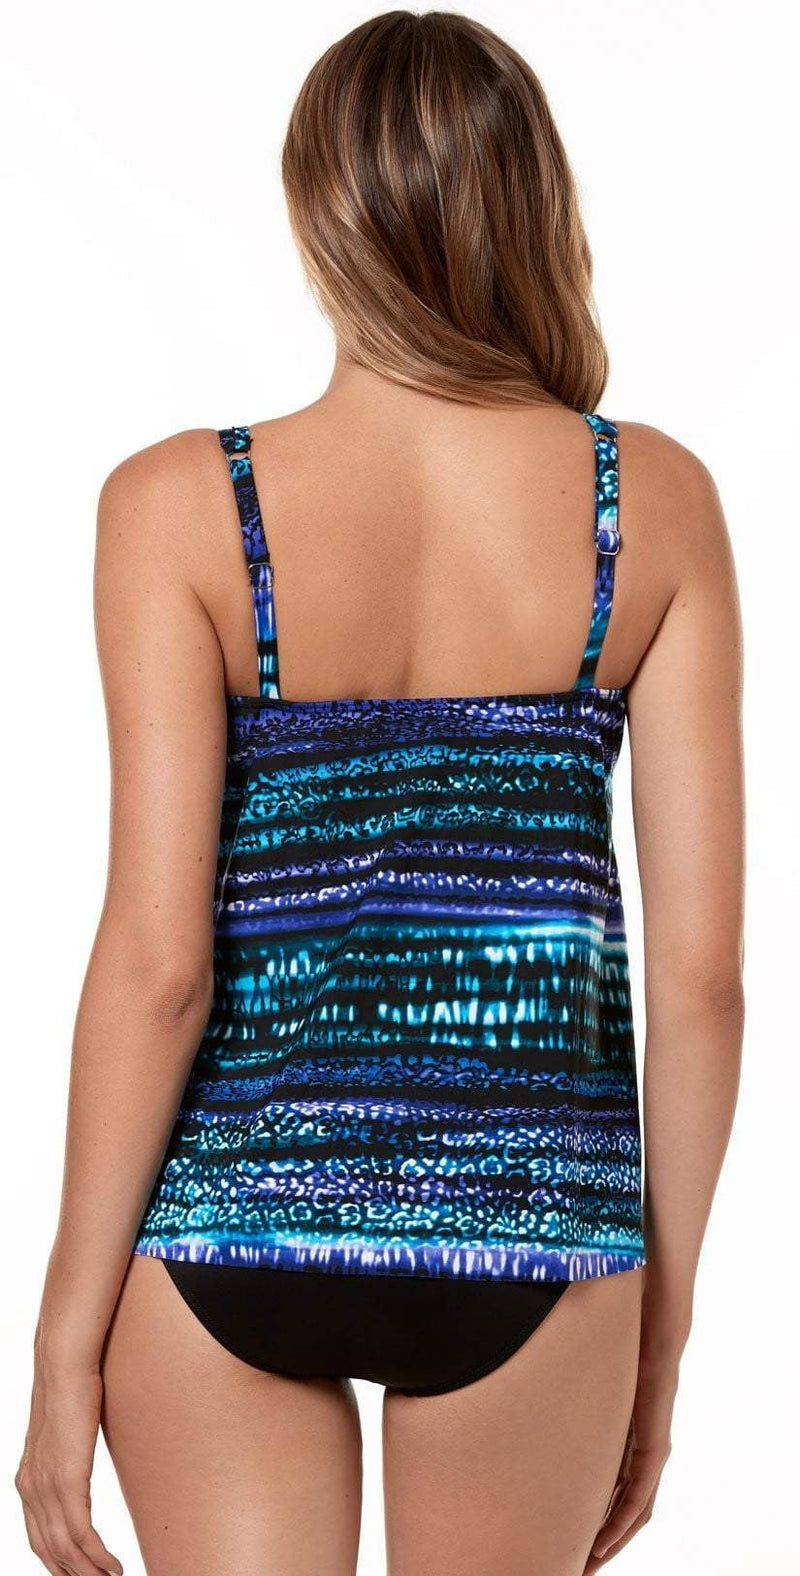 South Beach Swimsuits Miraclesuit Cat Bayou Mirage High Neck